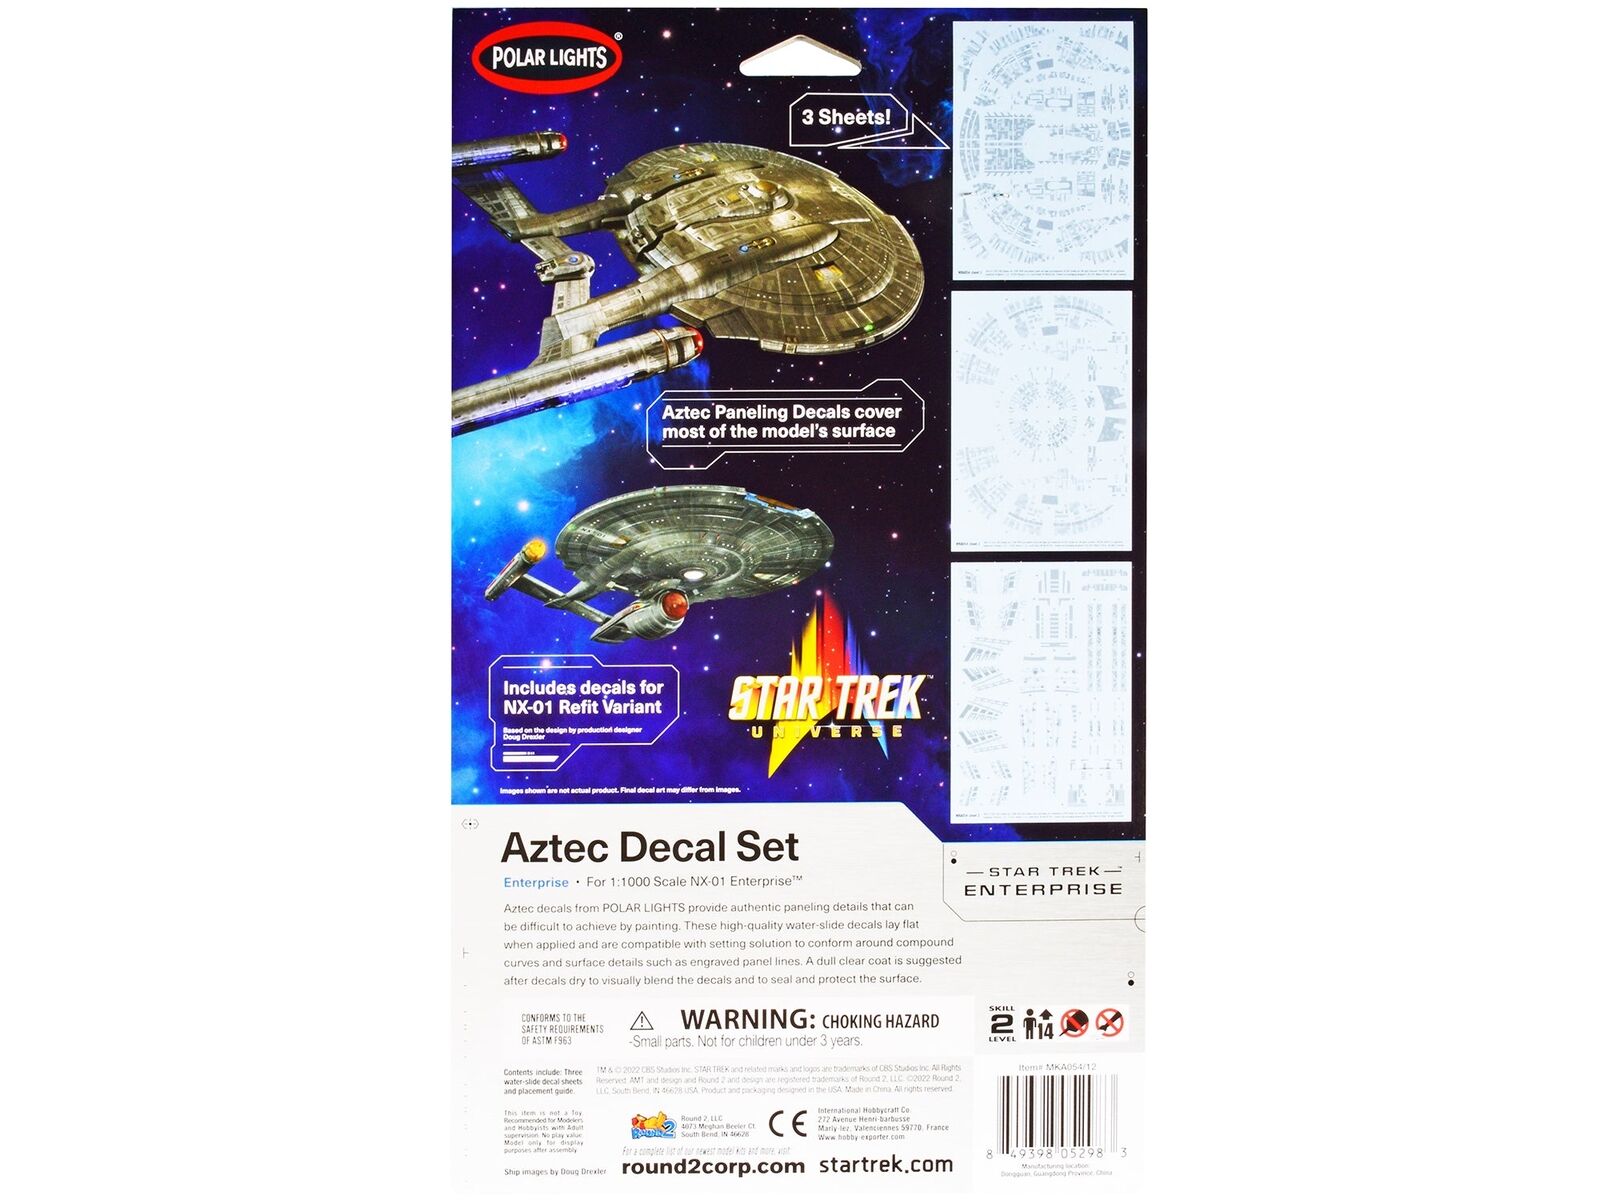 Star Trek Universe Aztec Decal Pack for NX-01 Enterprise Ship in 1/1000 Scale